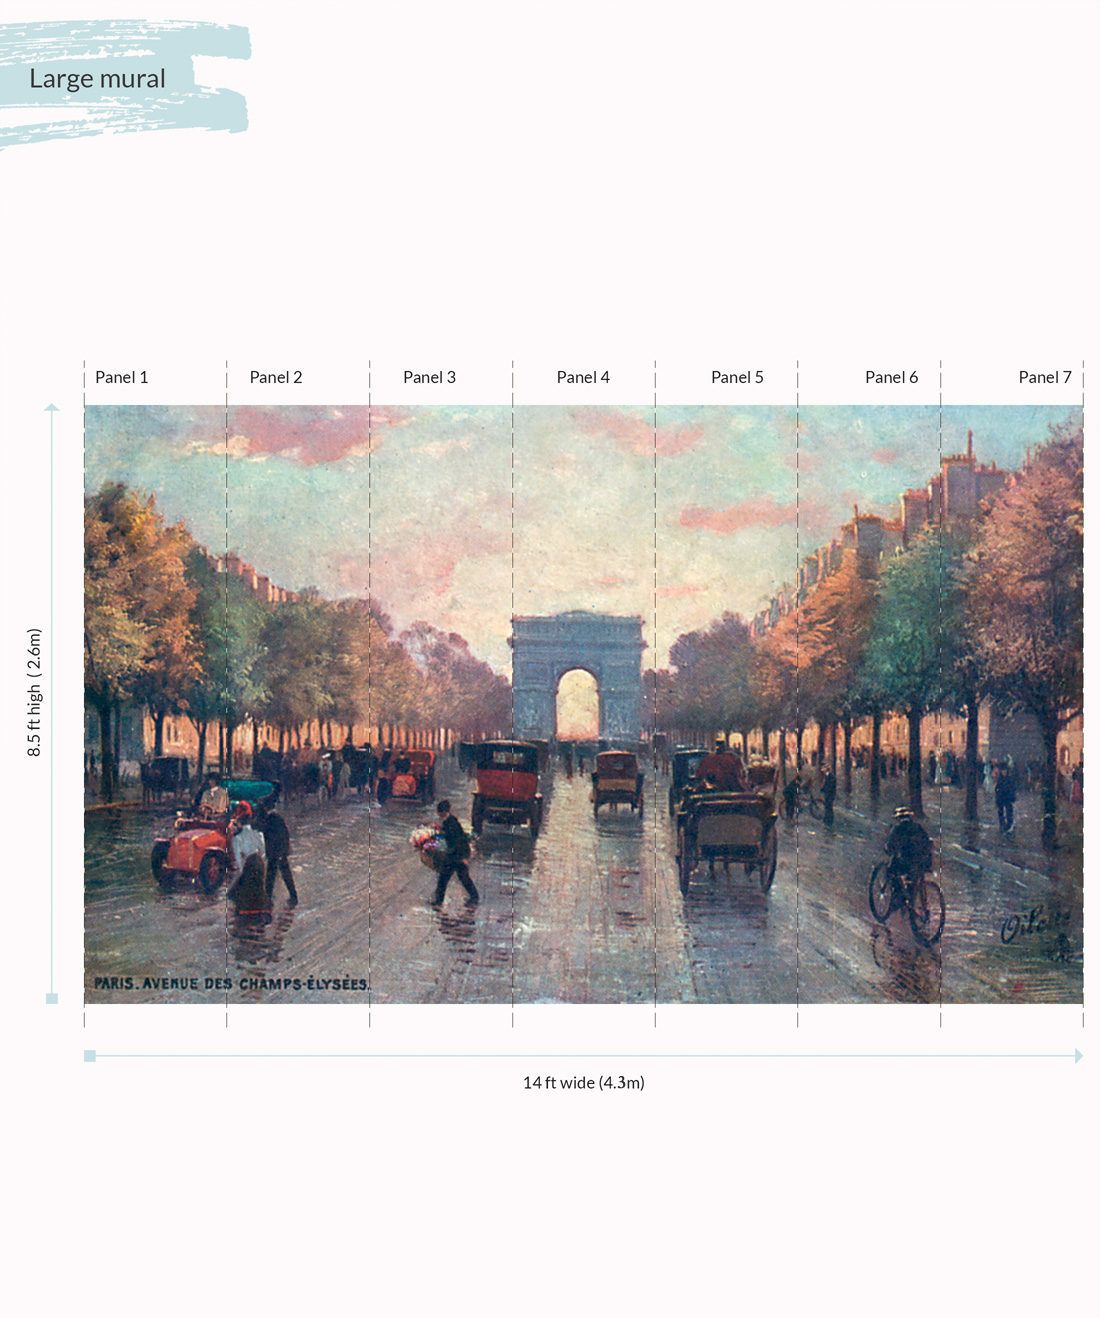 Champs Elysees Wall Mural - Large